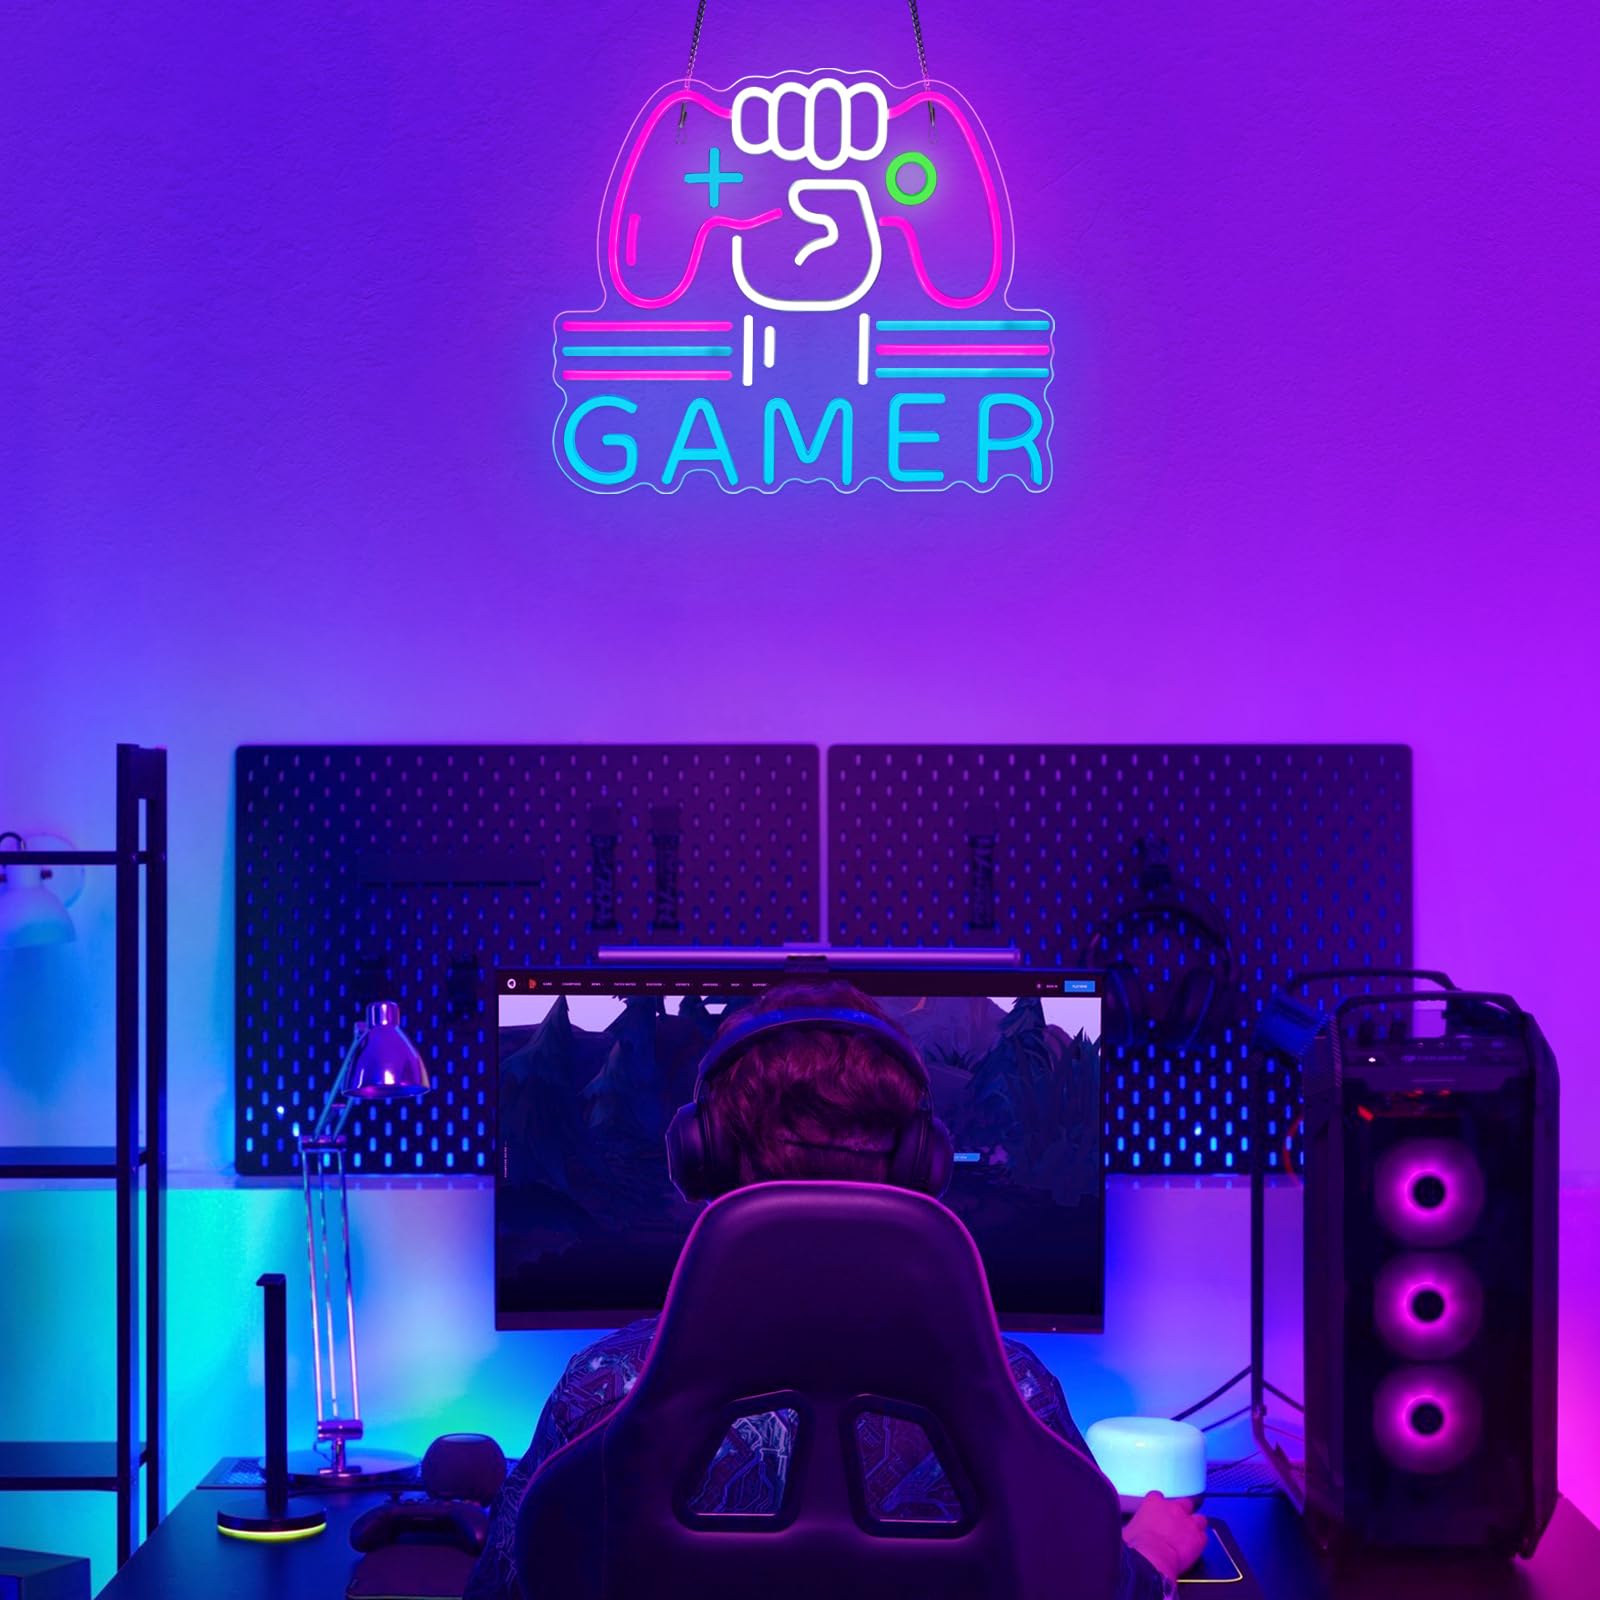 Gamer Neon Sign, Bright and Dimmable Large Colorful Neon Light for Gaming Video Room Bedroom Wall Decor, USB Powered LED Game Room Night Lights Gift for Boys Teen Kids Gamers(15.4X12.6") (Gamer) - amzGamess